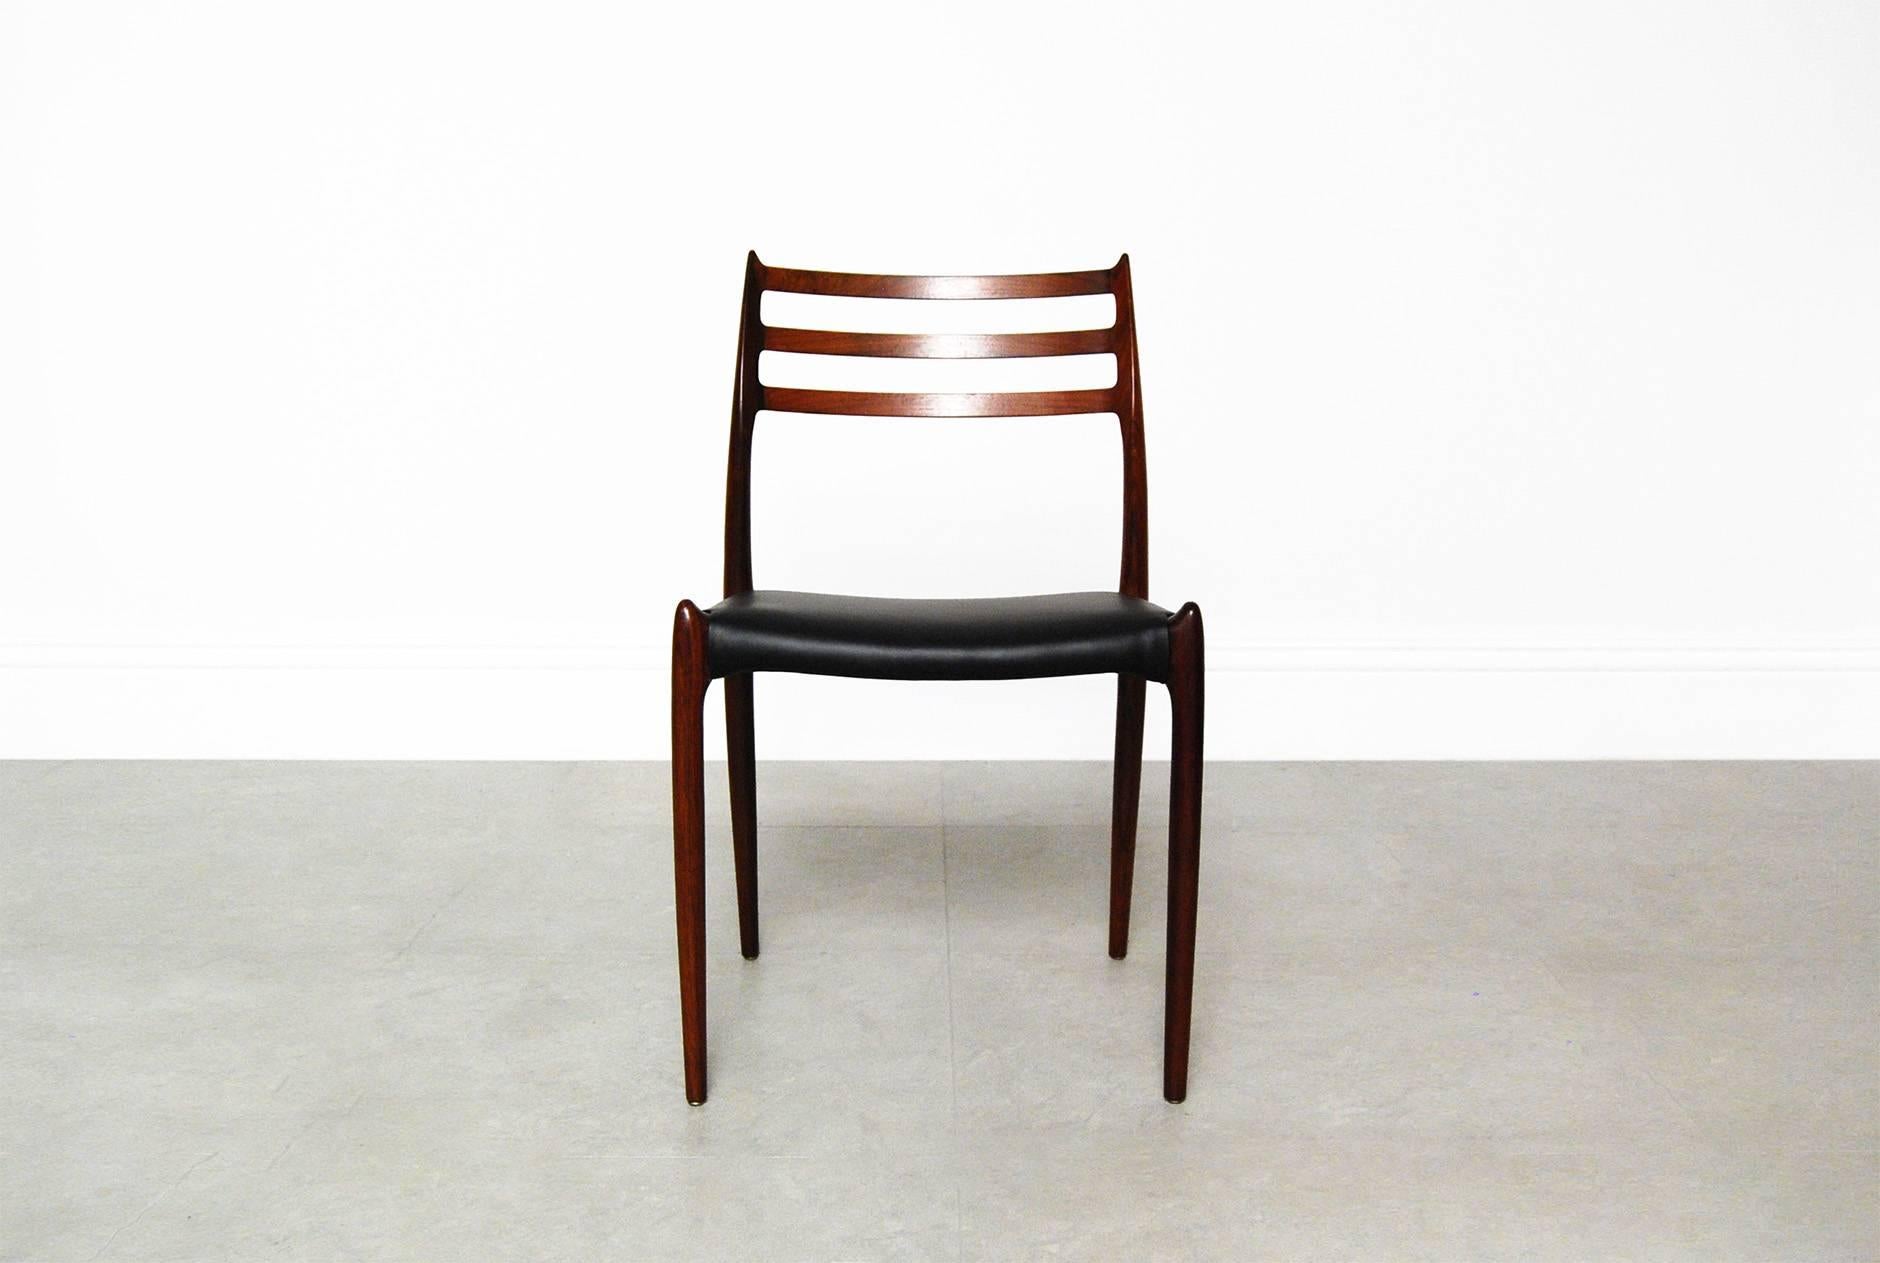 Set of six model 78 dining chairs from Niels Moller in Brazilian rosewood, circa 1965. One of the most iconic and sought after dining chairs from the Danish modern era. Reupholstered in new black leather.